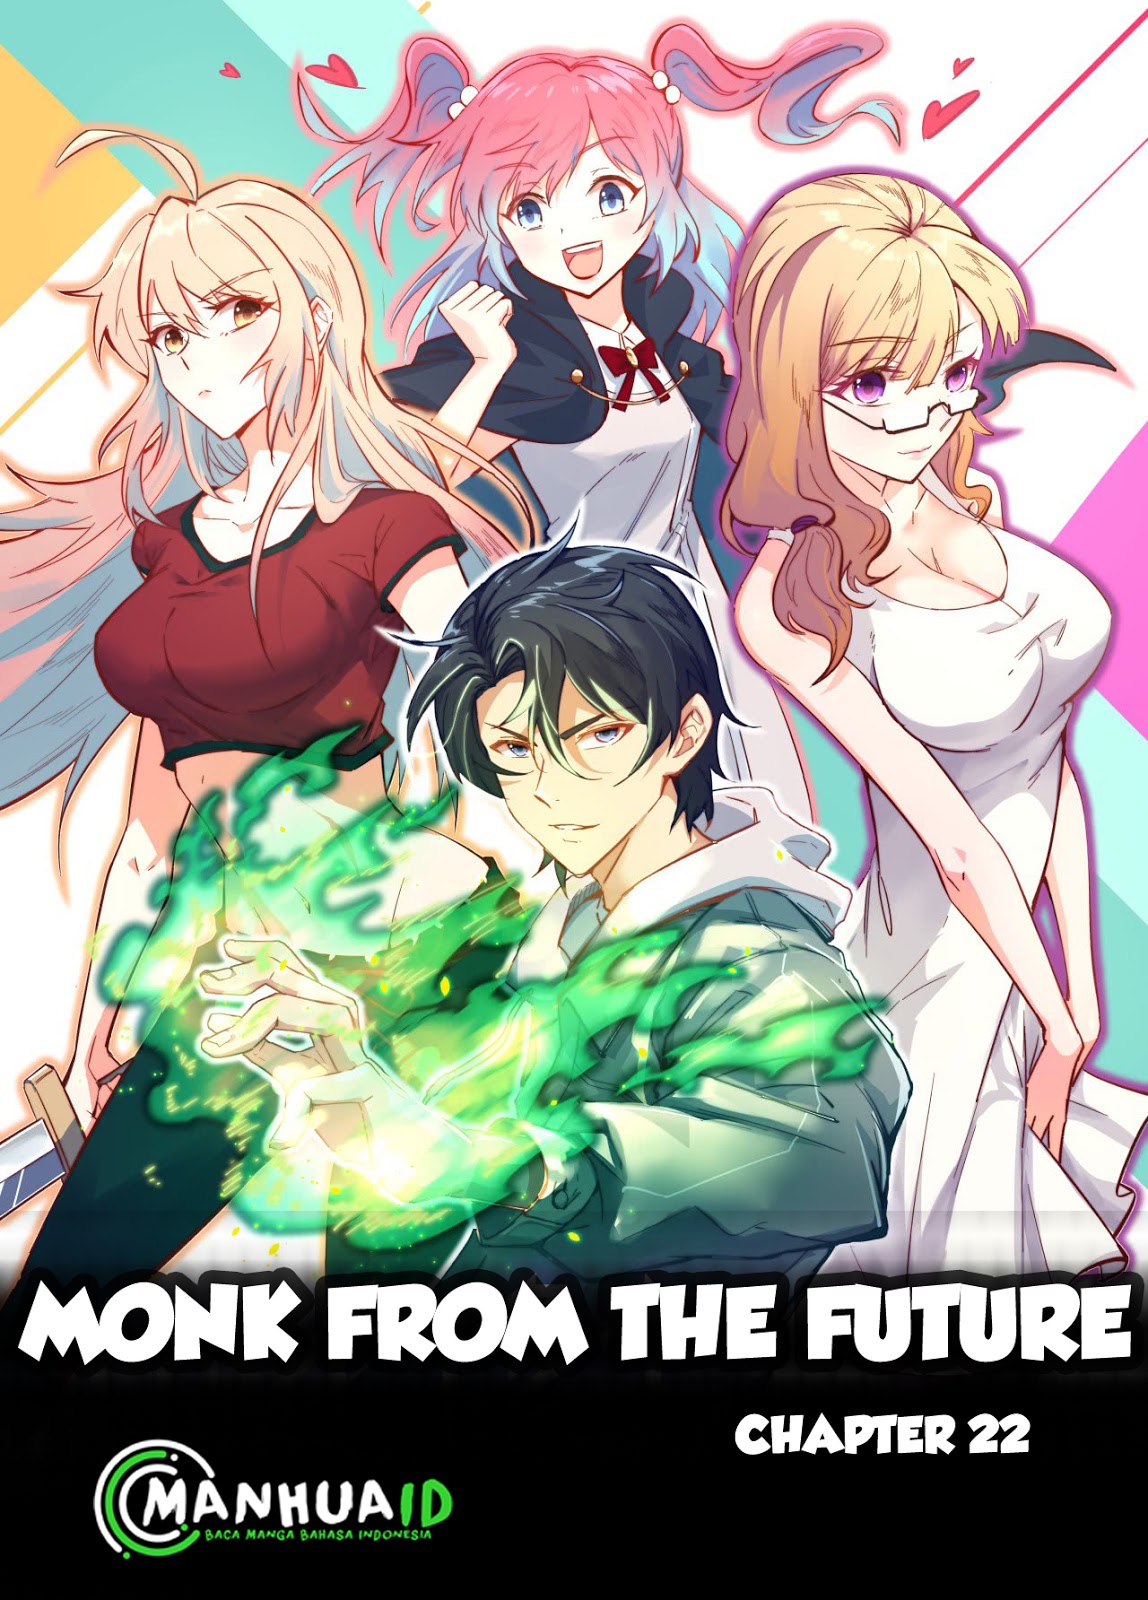 Monk From the Future Chapter 22